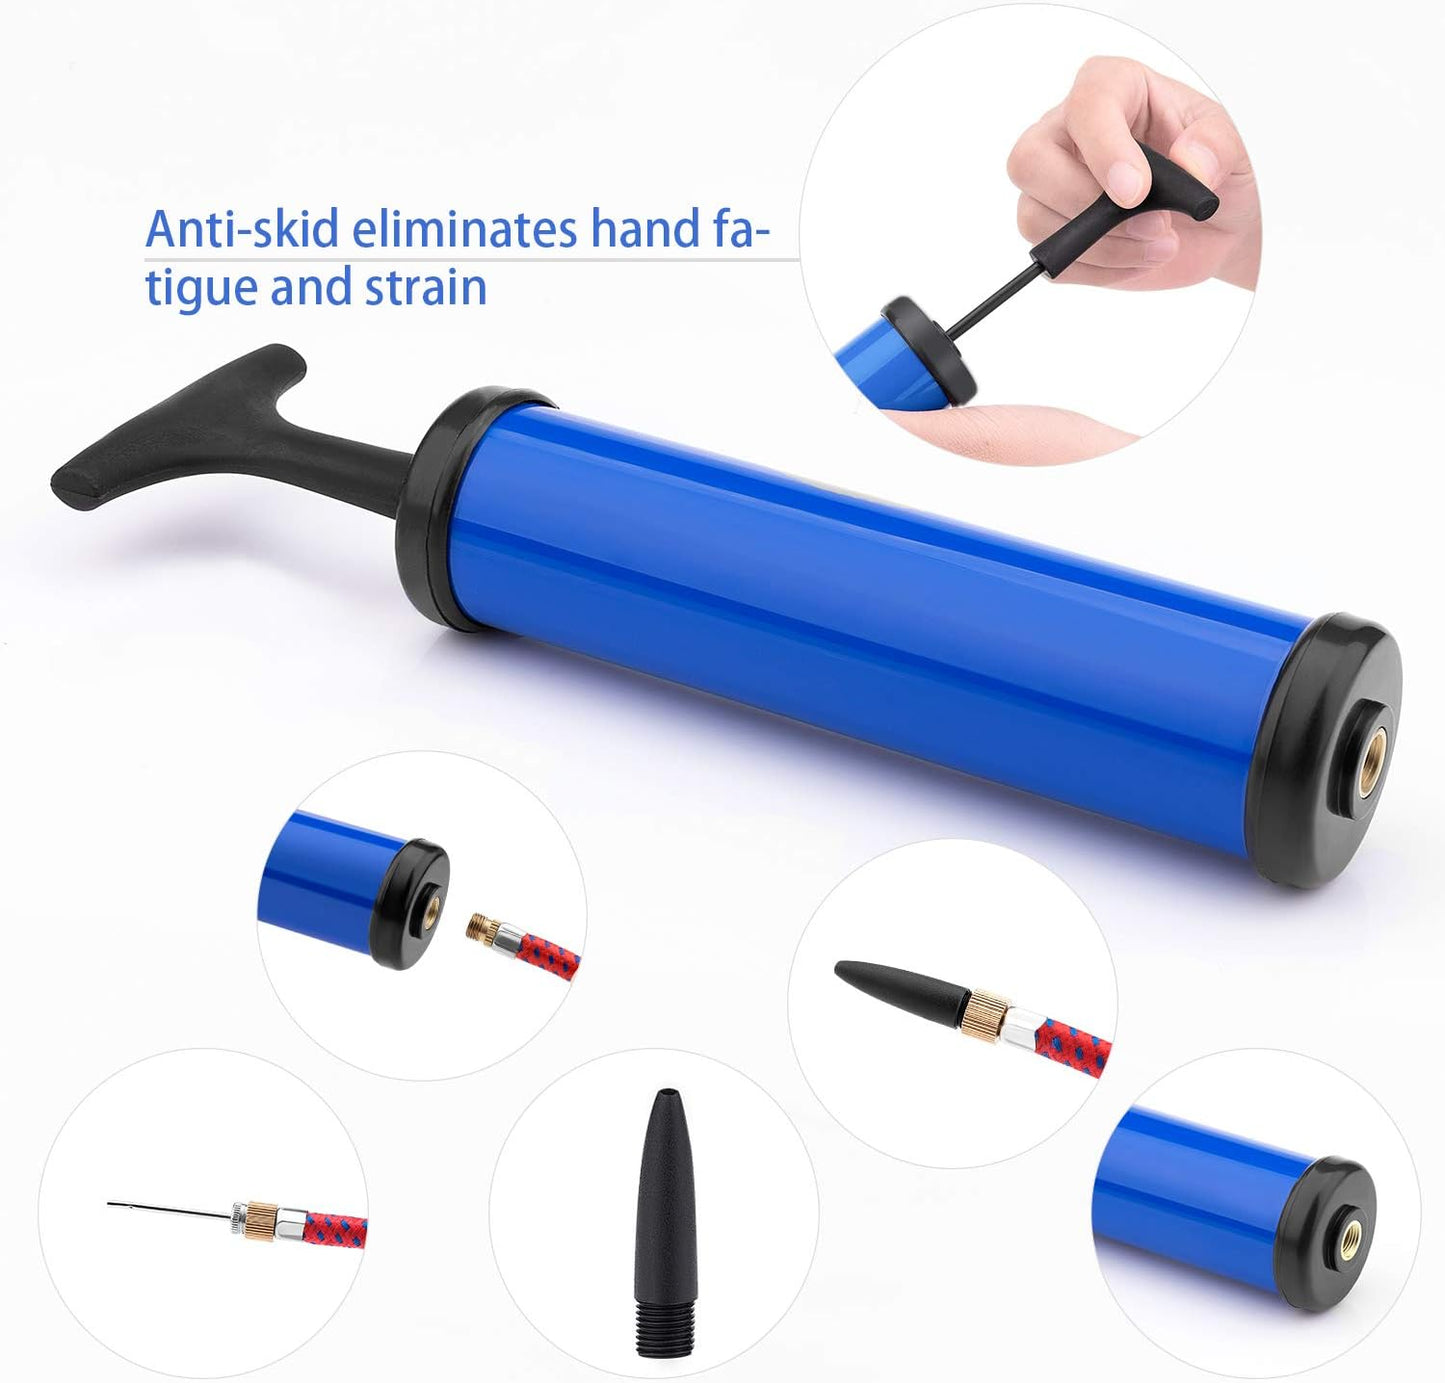 Portable inflation equipment, manual air pump with needle for inflatable balls